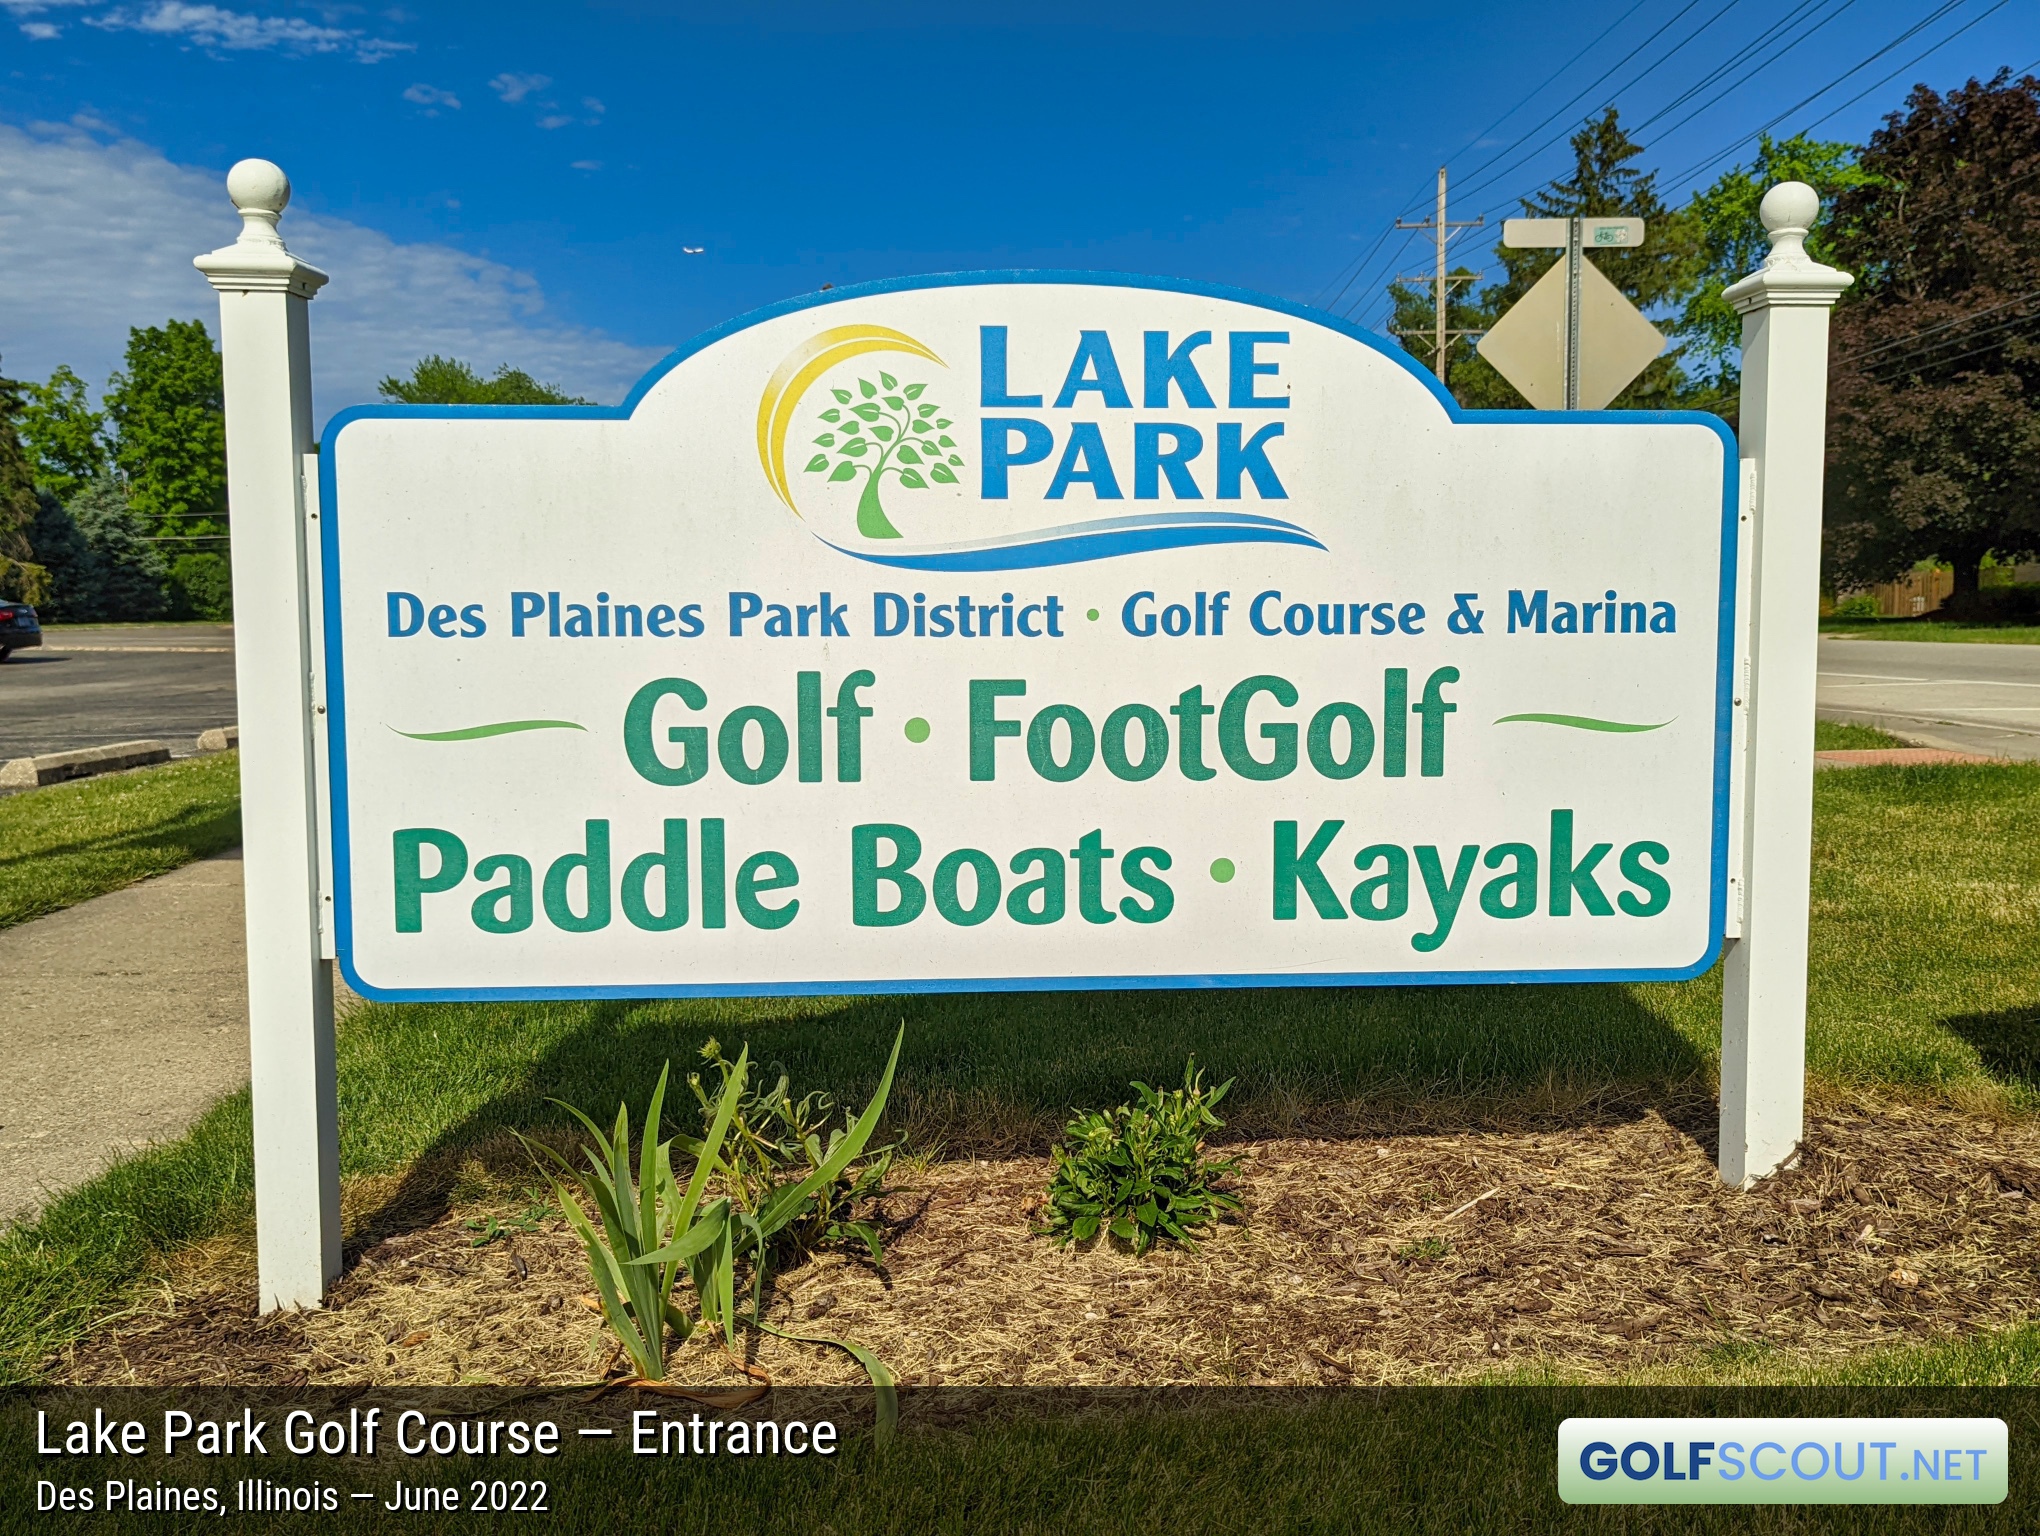 Sign at the entrance to Lake Park Golf Course